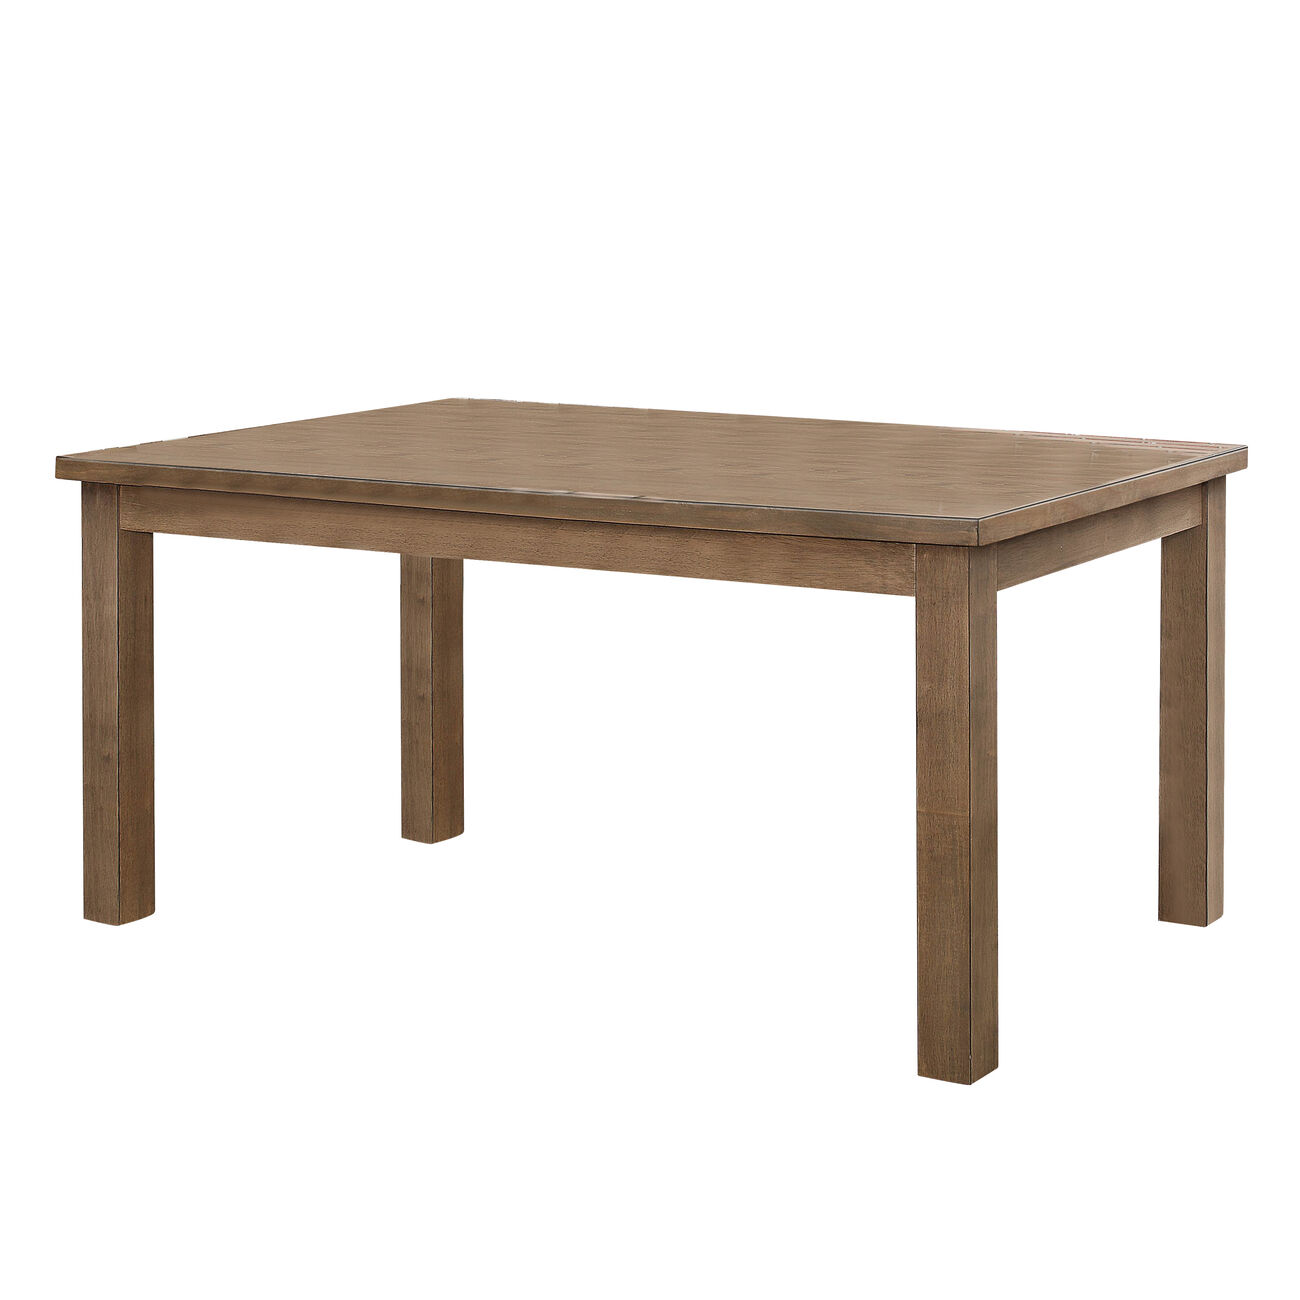 Transitional Wooden Dining Table with Grain Details and Block legs, Brown